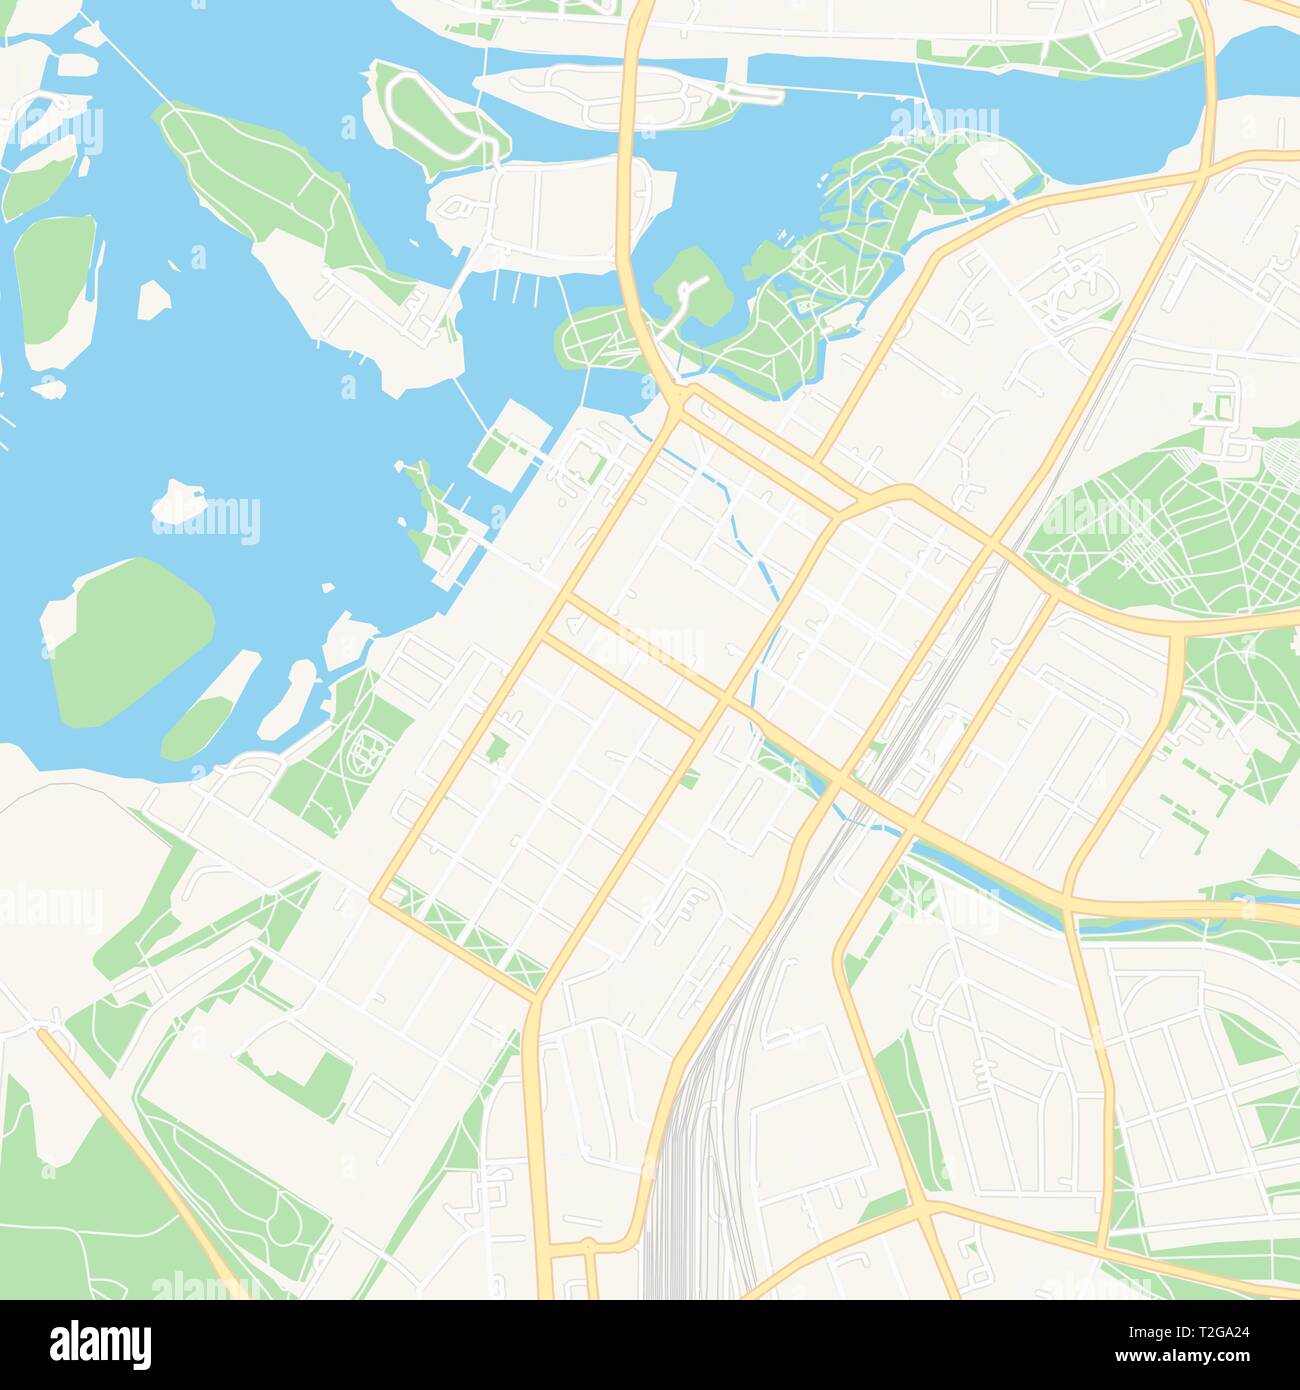 Printable map of Oulu, Finland with main and secondary roads and larger railways. This map is carefully designed for routing and placing individual da Stock Vector